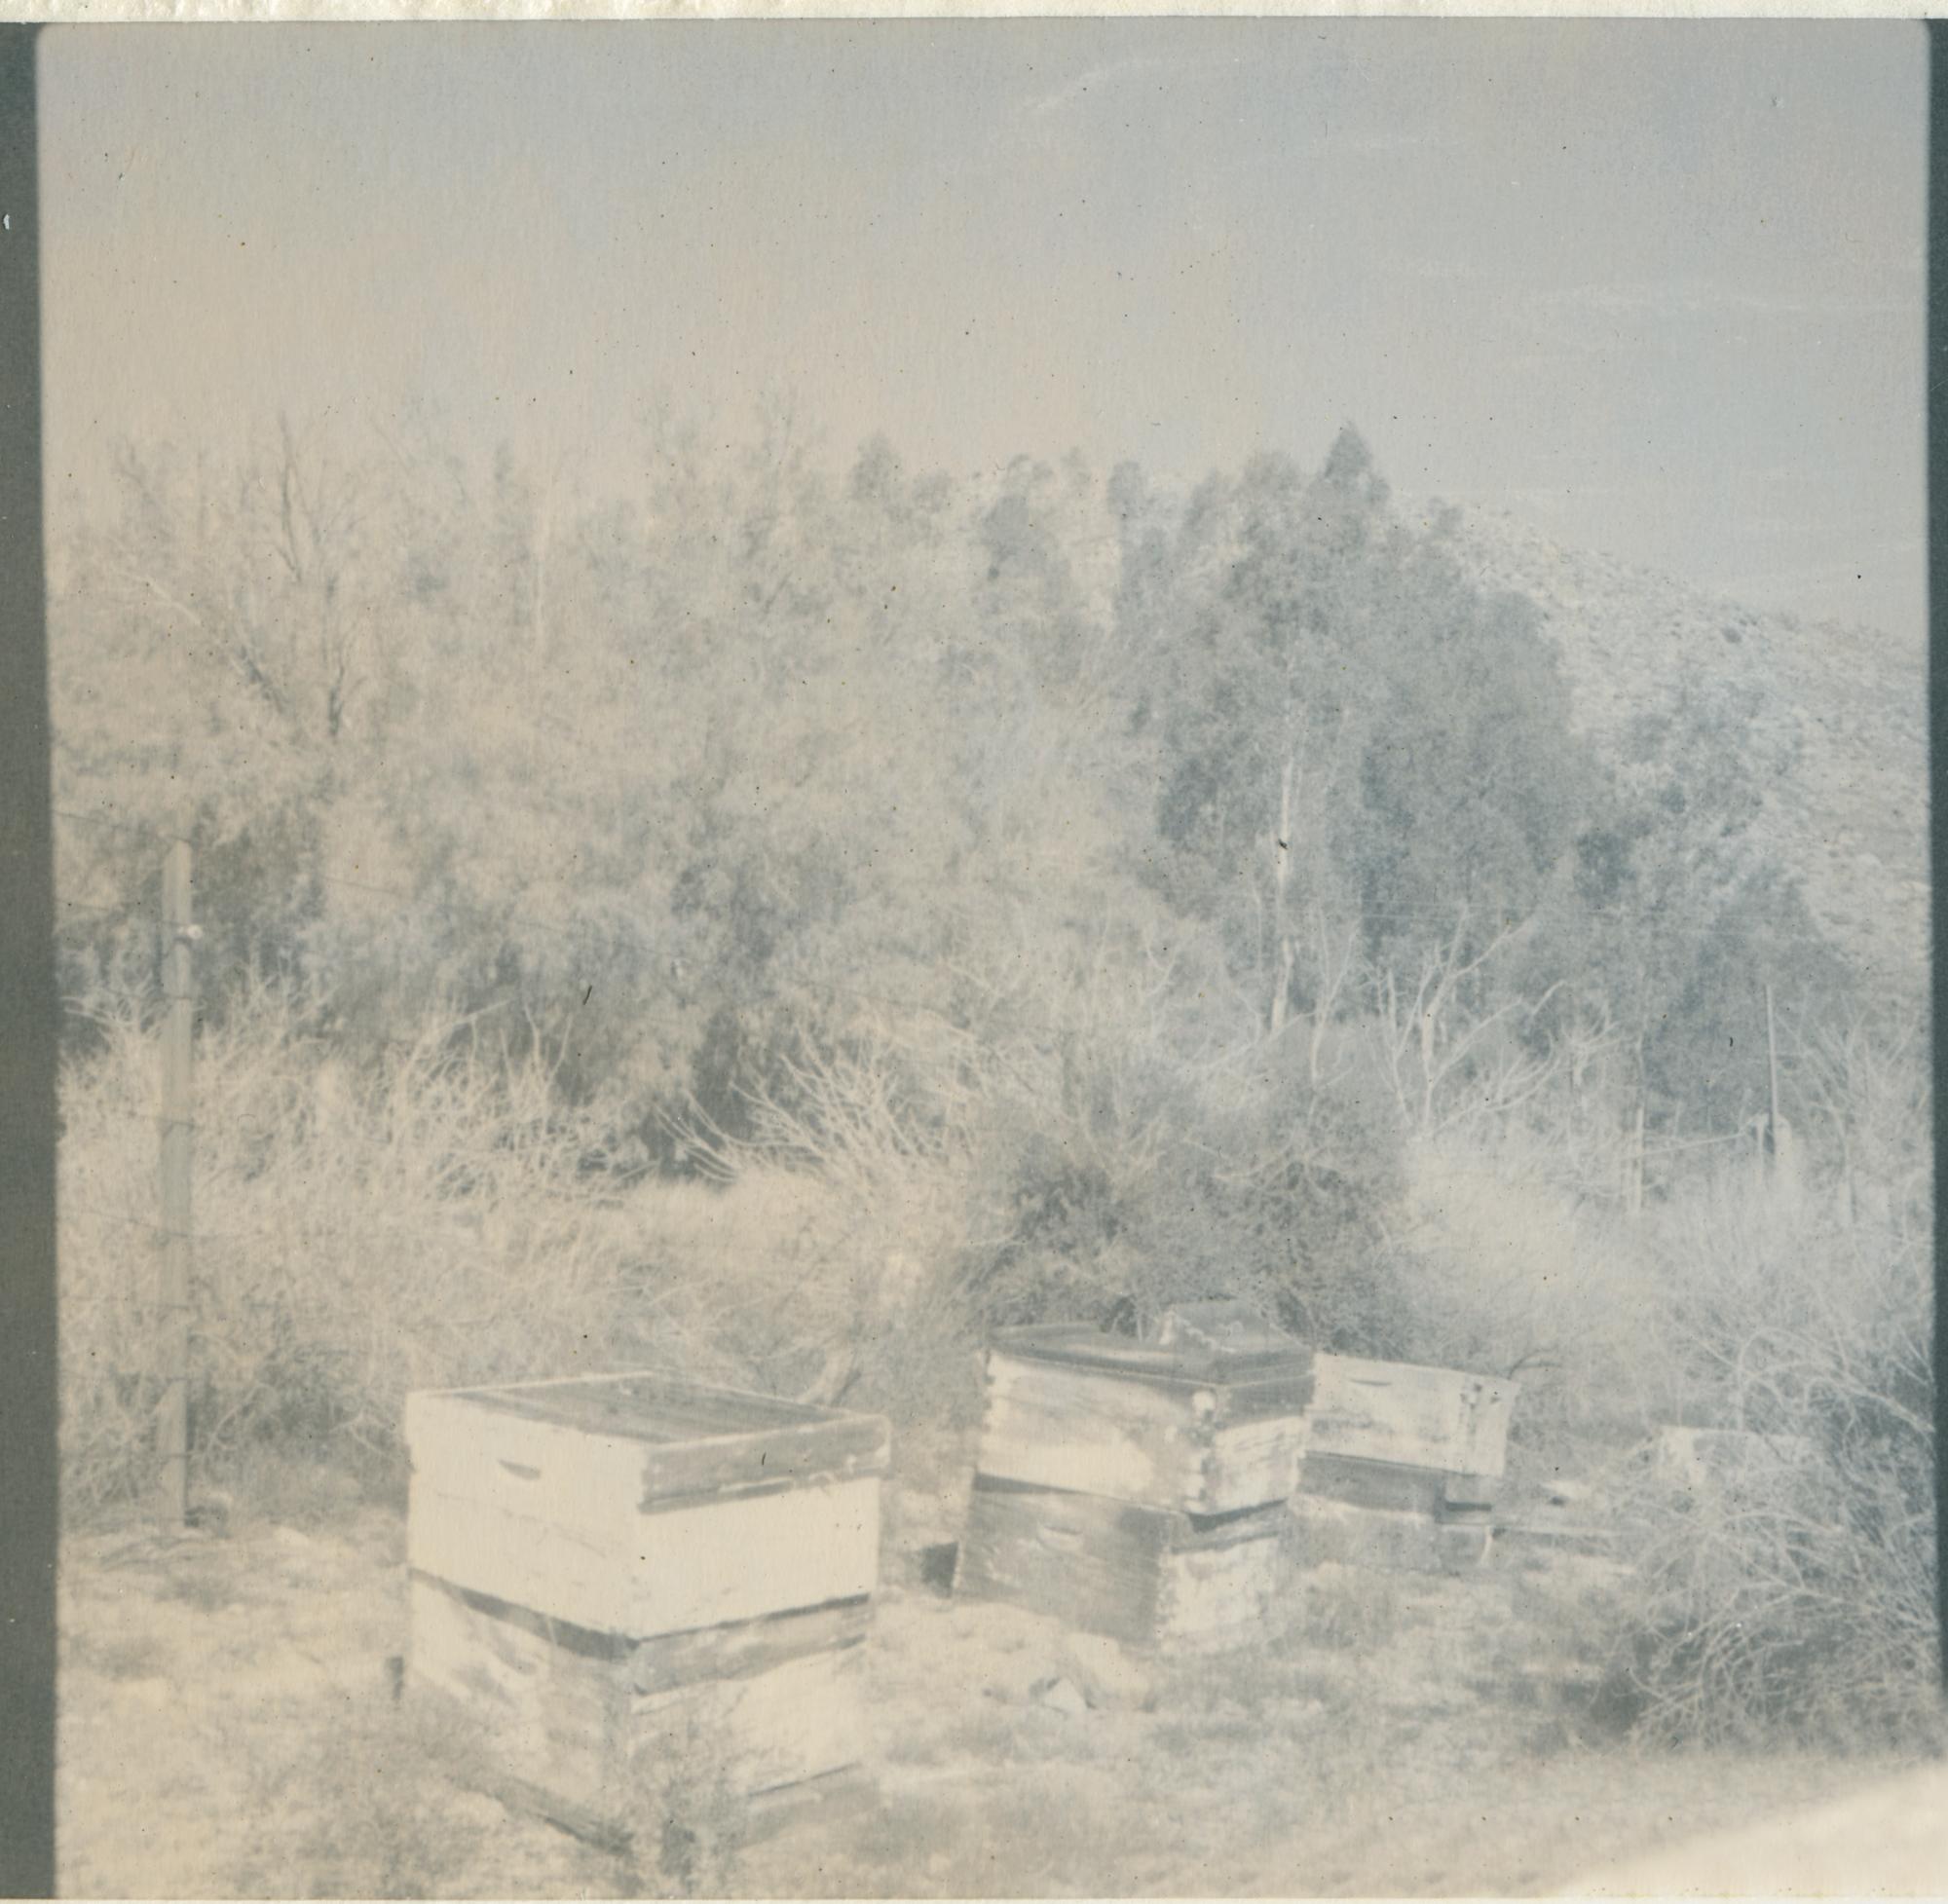 Stefanie Schneider Black and White Photograph - Deserted Bee Boxes (California Dreaming) - Contemporary, 21st Century, Polaroid